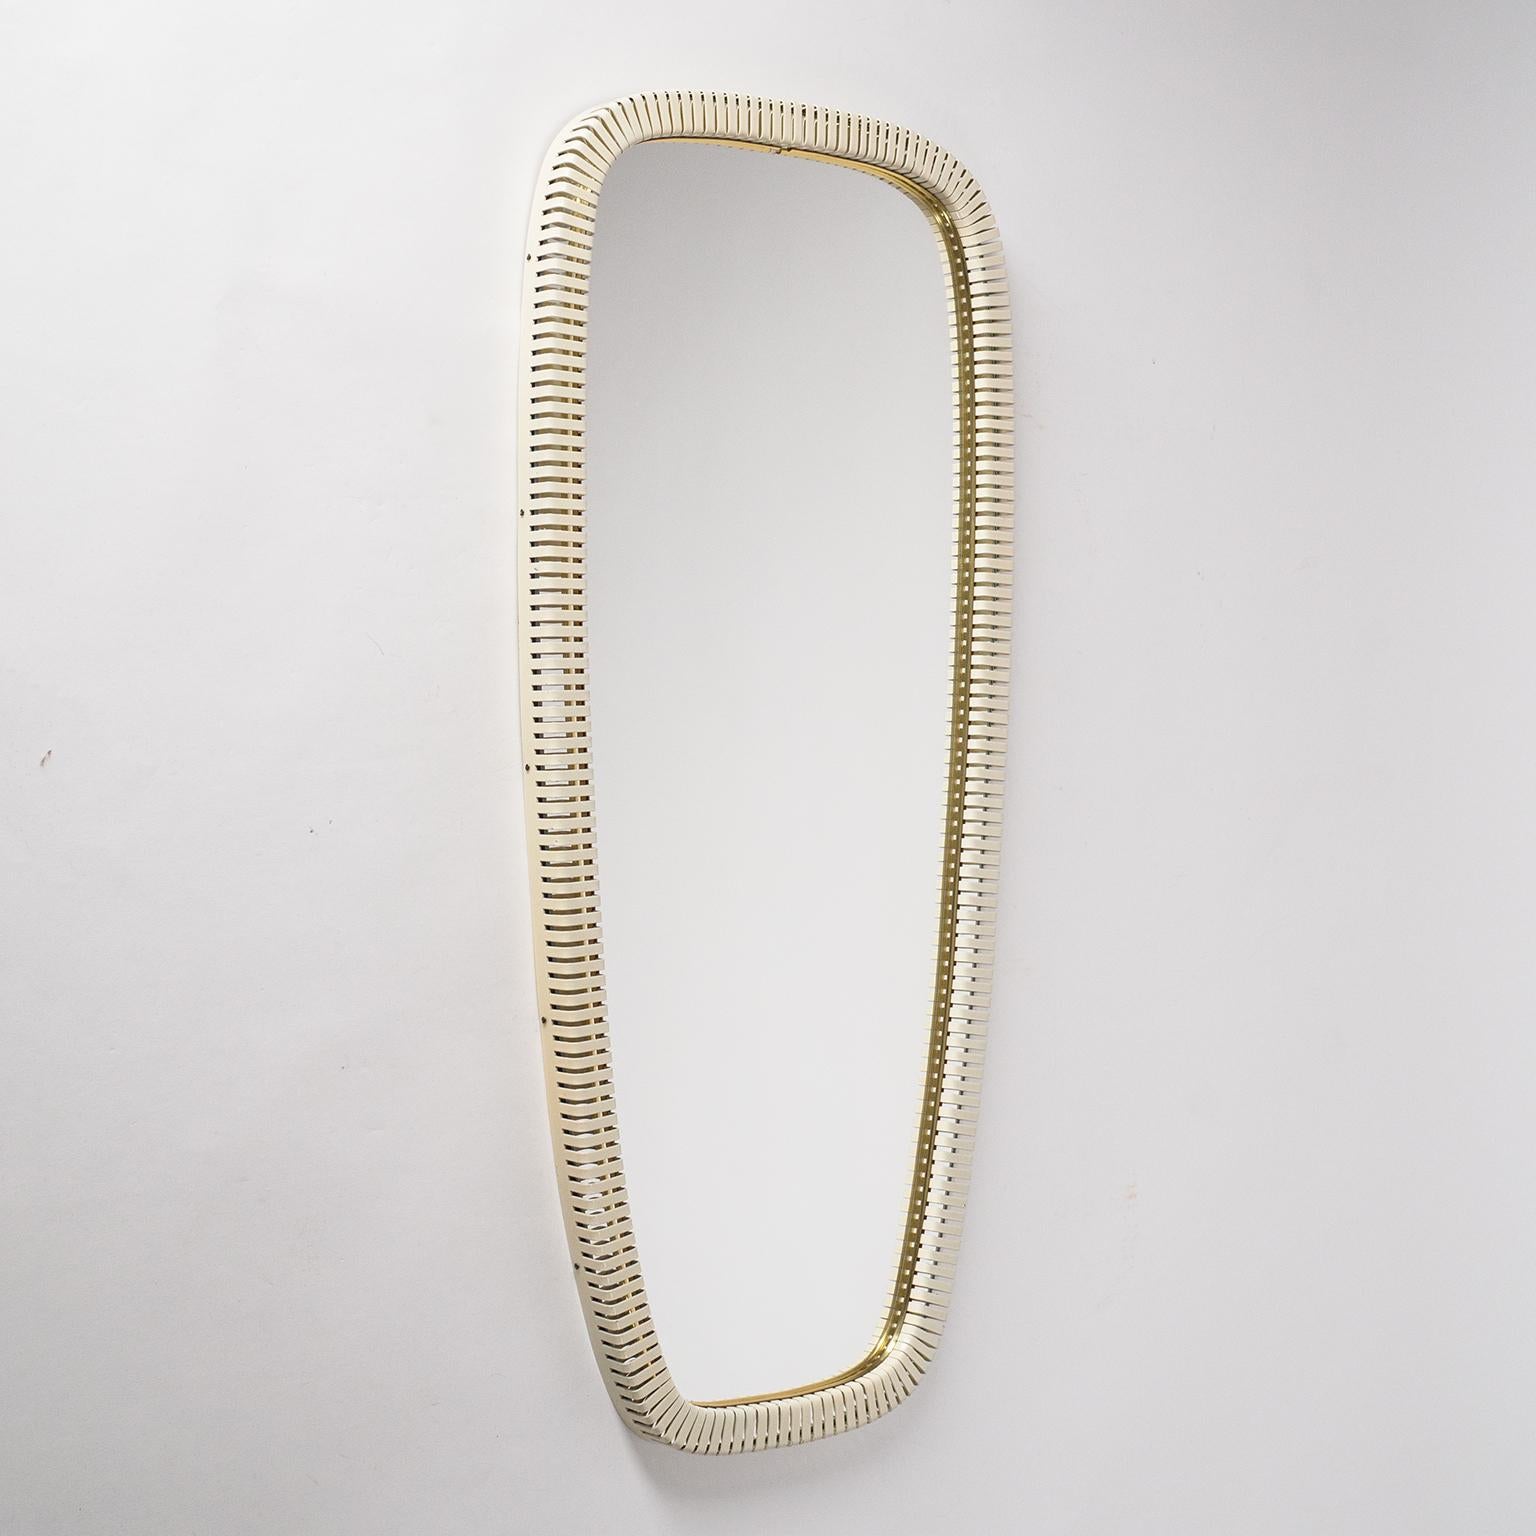 Very unique slender wall mirror, circa 1960, by Vereinigte Werkstätten, Germany. The seamless border of this mirror is made of off-white lacquered profiled steel with periodic incisions or slits and a brass inner rim. Since the reflective area